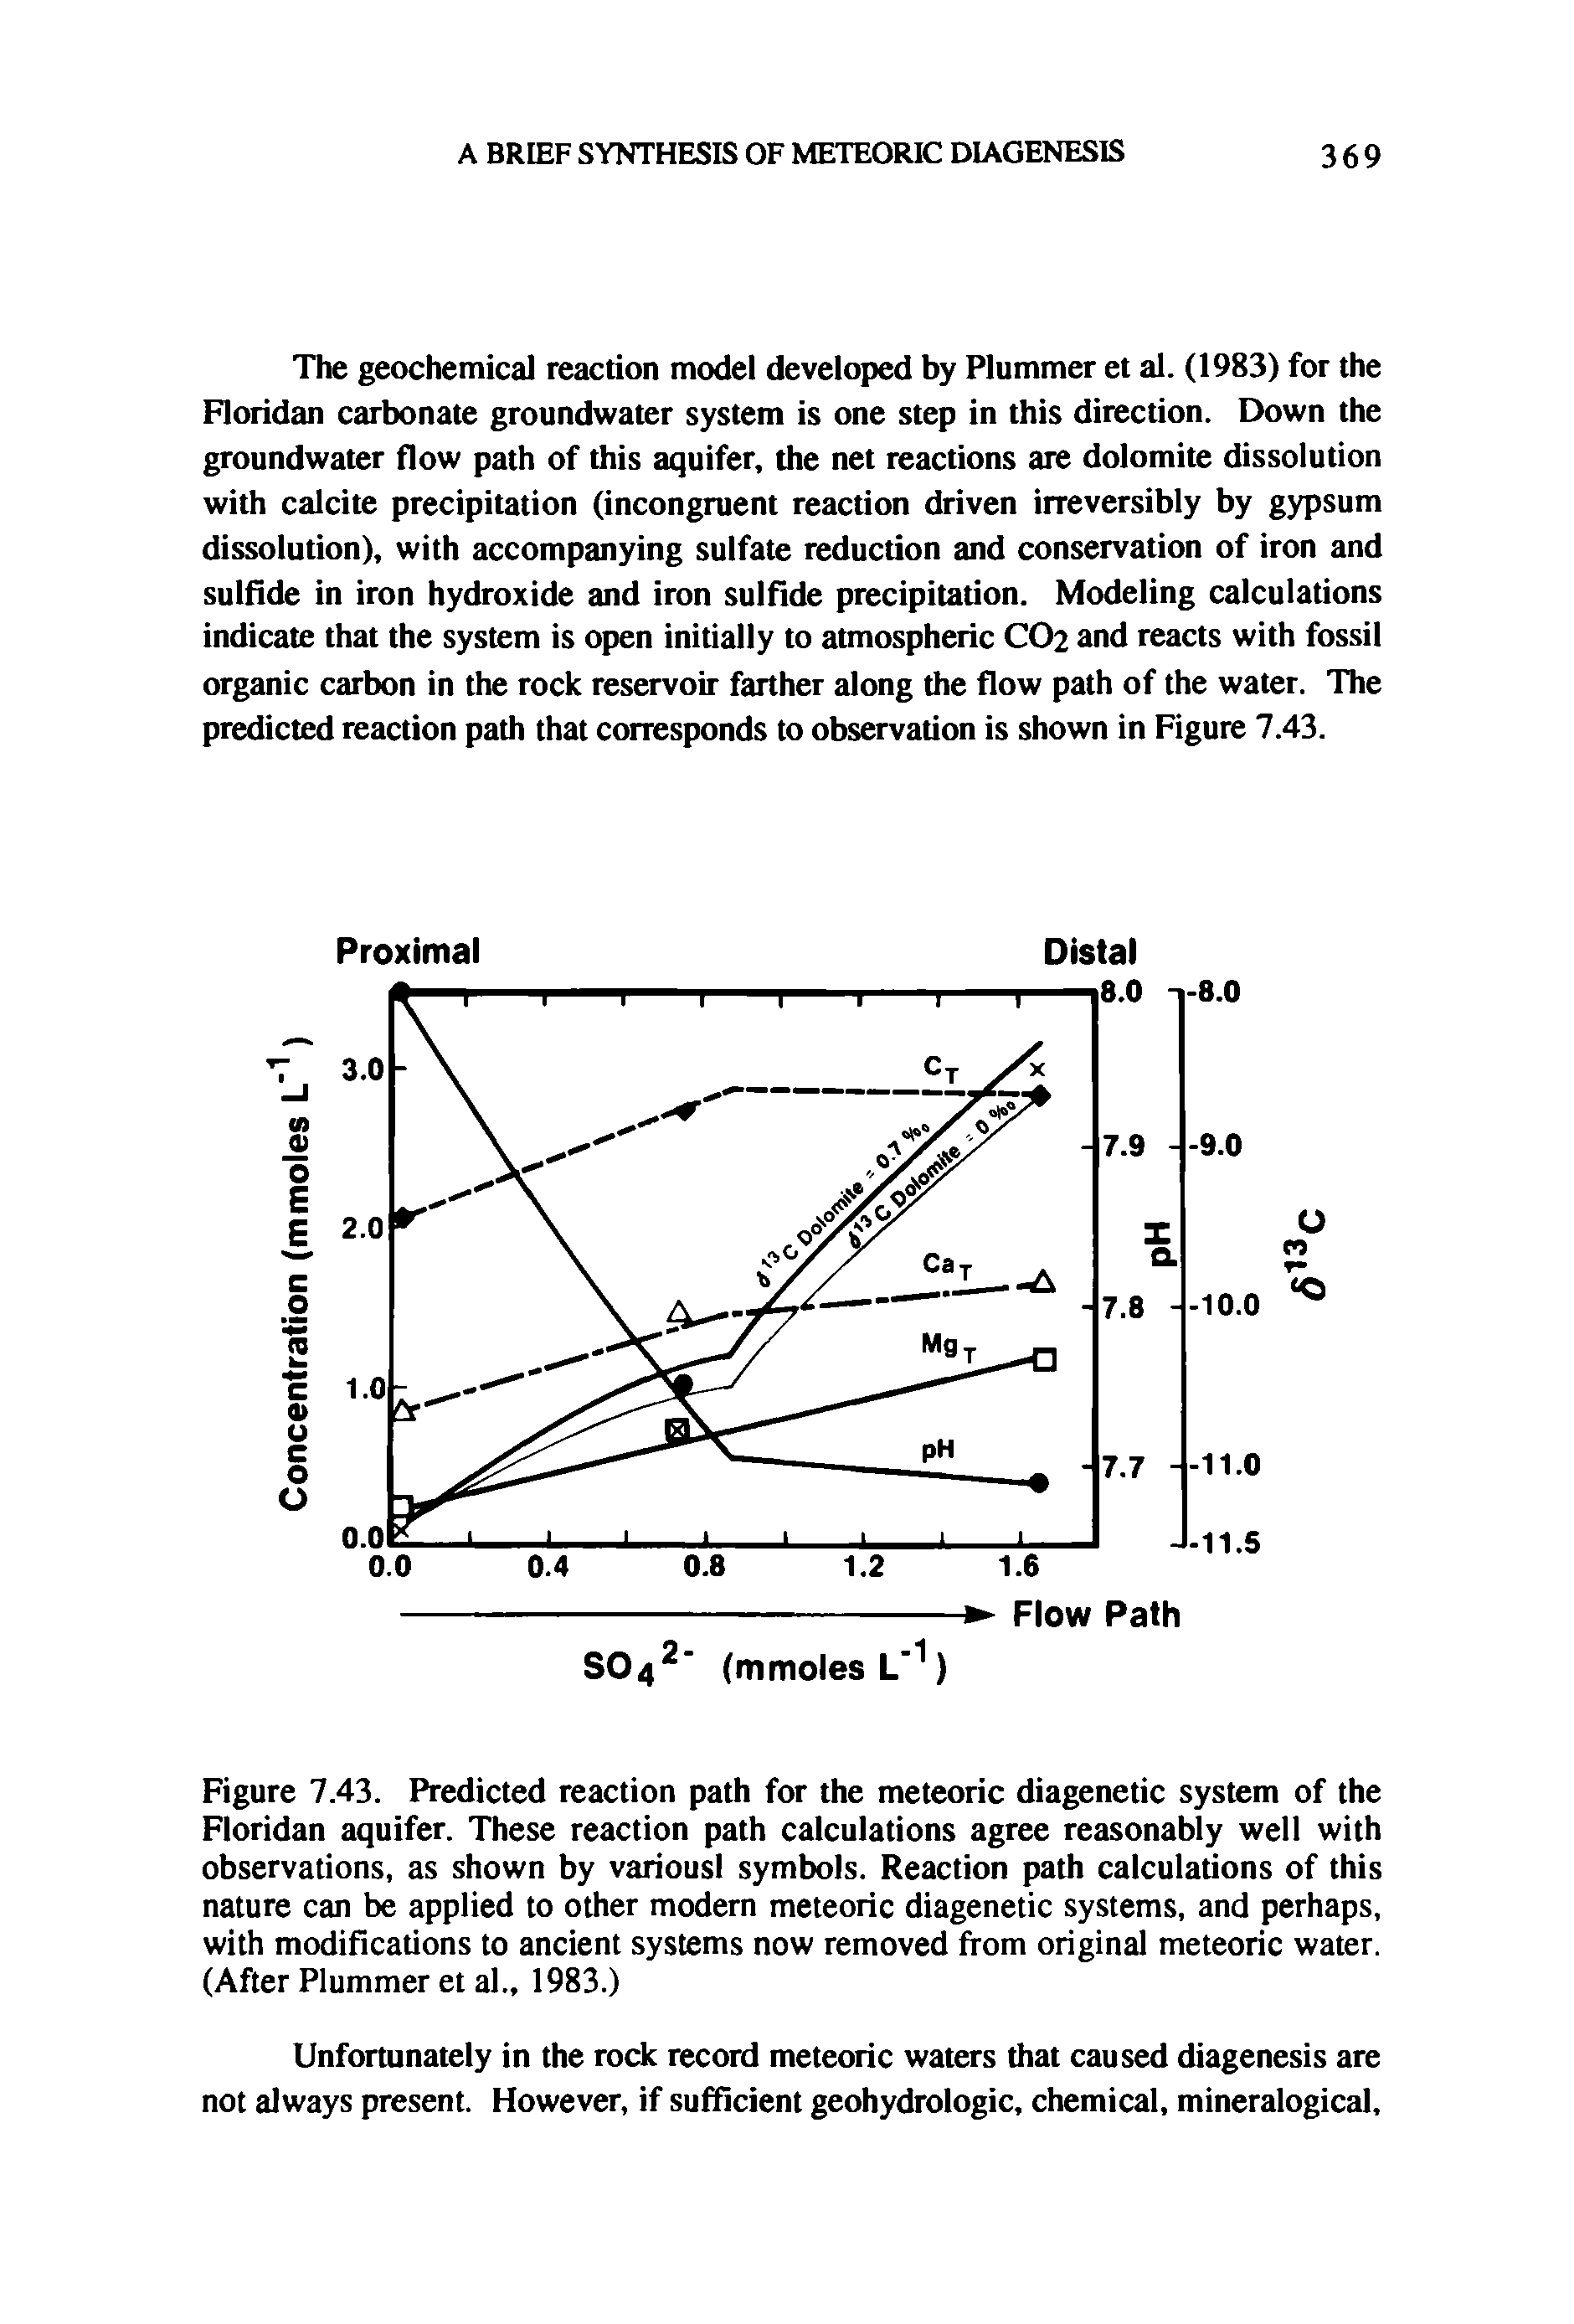 Figure 7.43. Predicted reaction path for the meteoric diagenetic system of the Floridan aquifer. These reaction path calculations agree reasonably well with observations, as shown by variousl symbols. Reaction path calculations of this nature can be applied to other modern meteoric diagenetic systems, and perhaps, with modifications to ancient systems now removed from original meteoric water. (After Plummer et al., 1983.)...